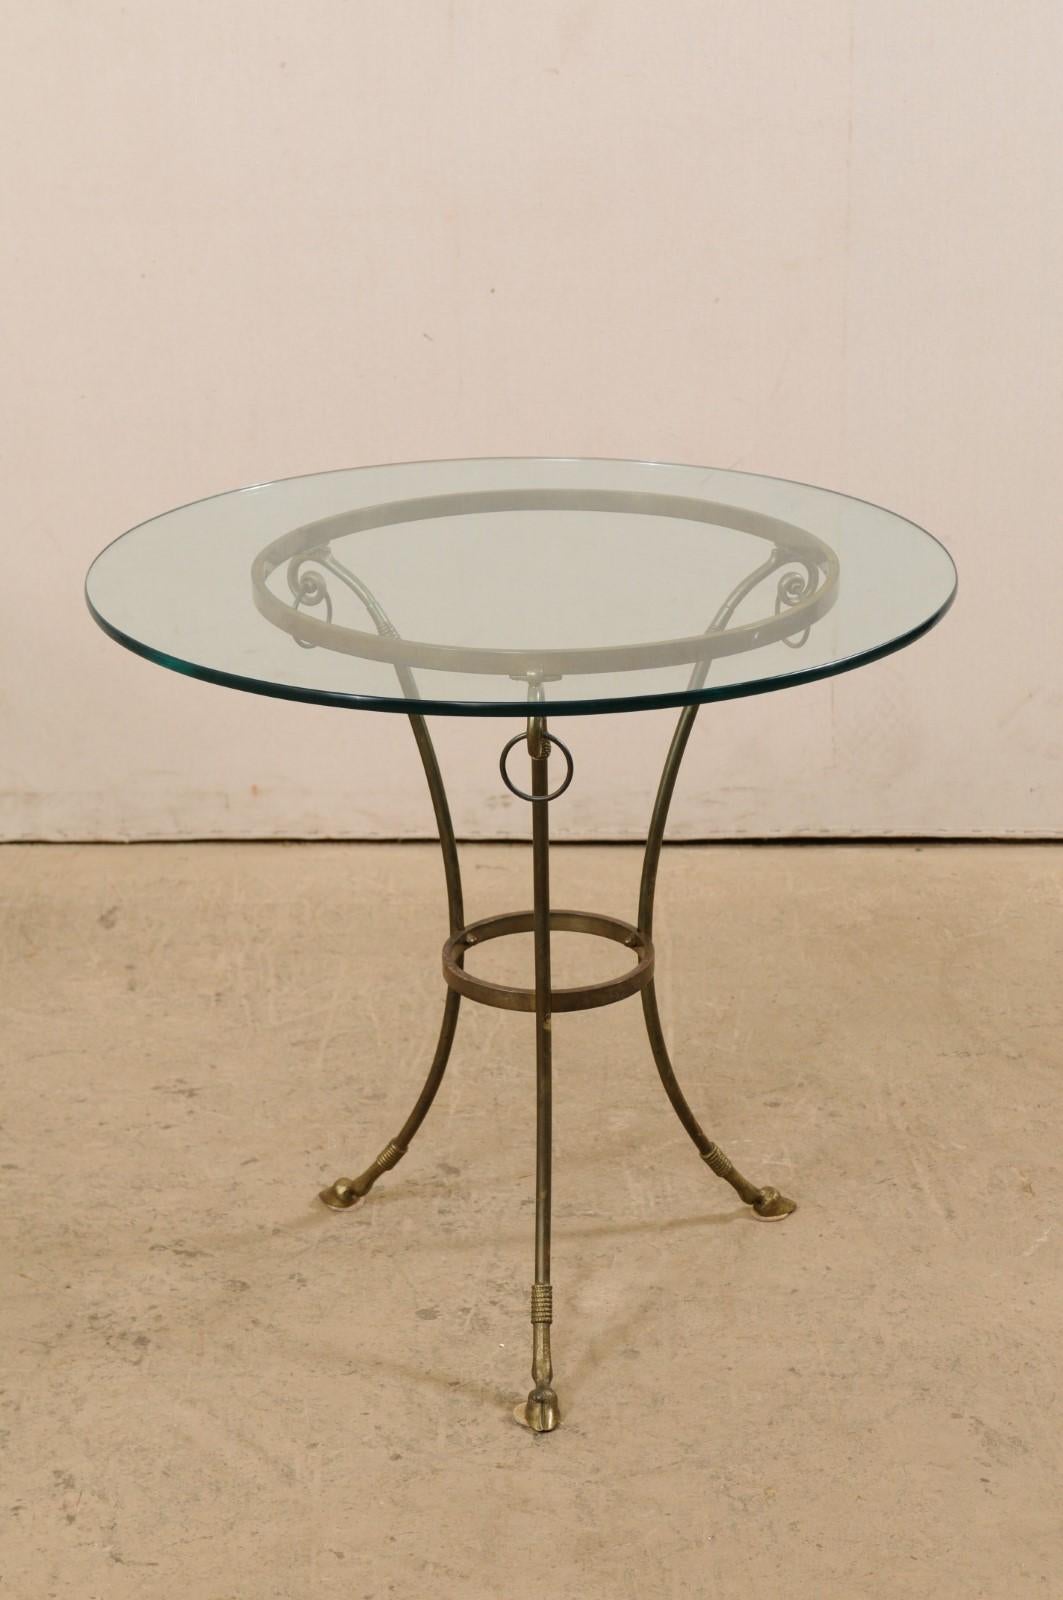 20th Century Italian Pair of Round Brass Tables with Hooved Feet and Glass Tops For Sale